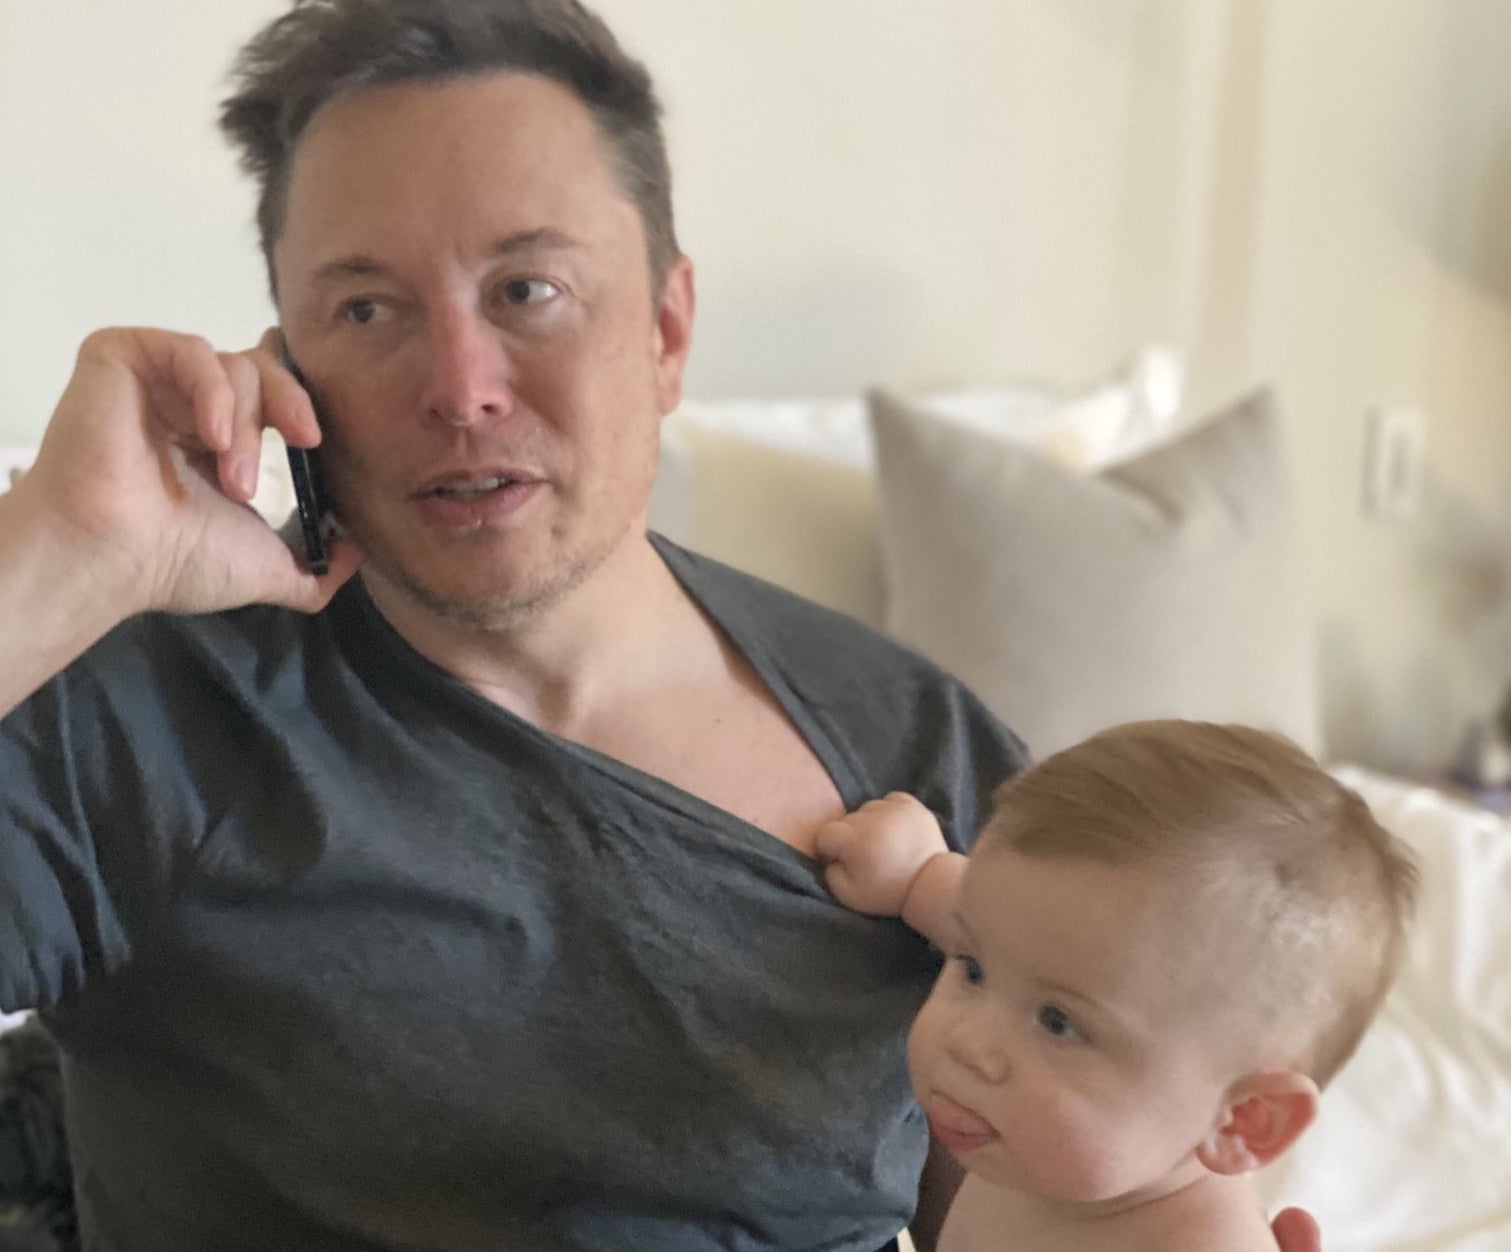 Above: Elon Musk and his son "Lil X" (Twitter: Elon Musk)